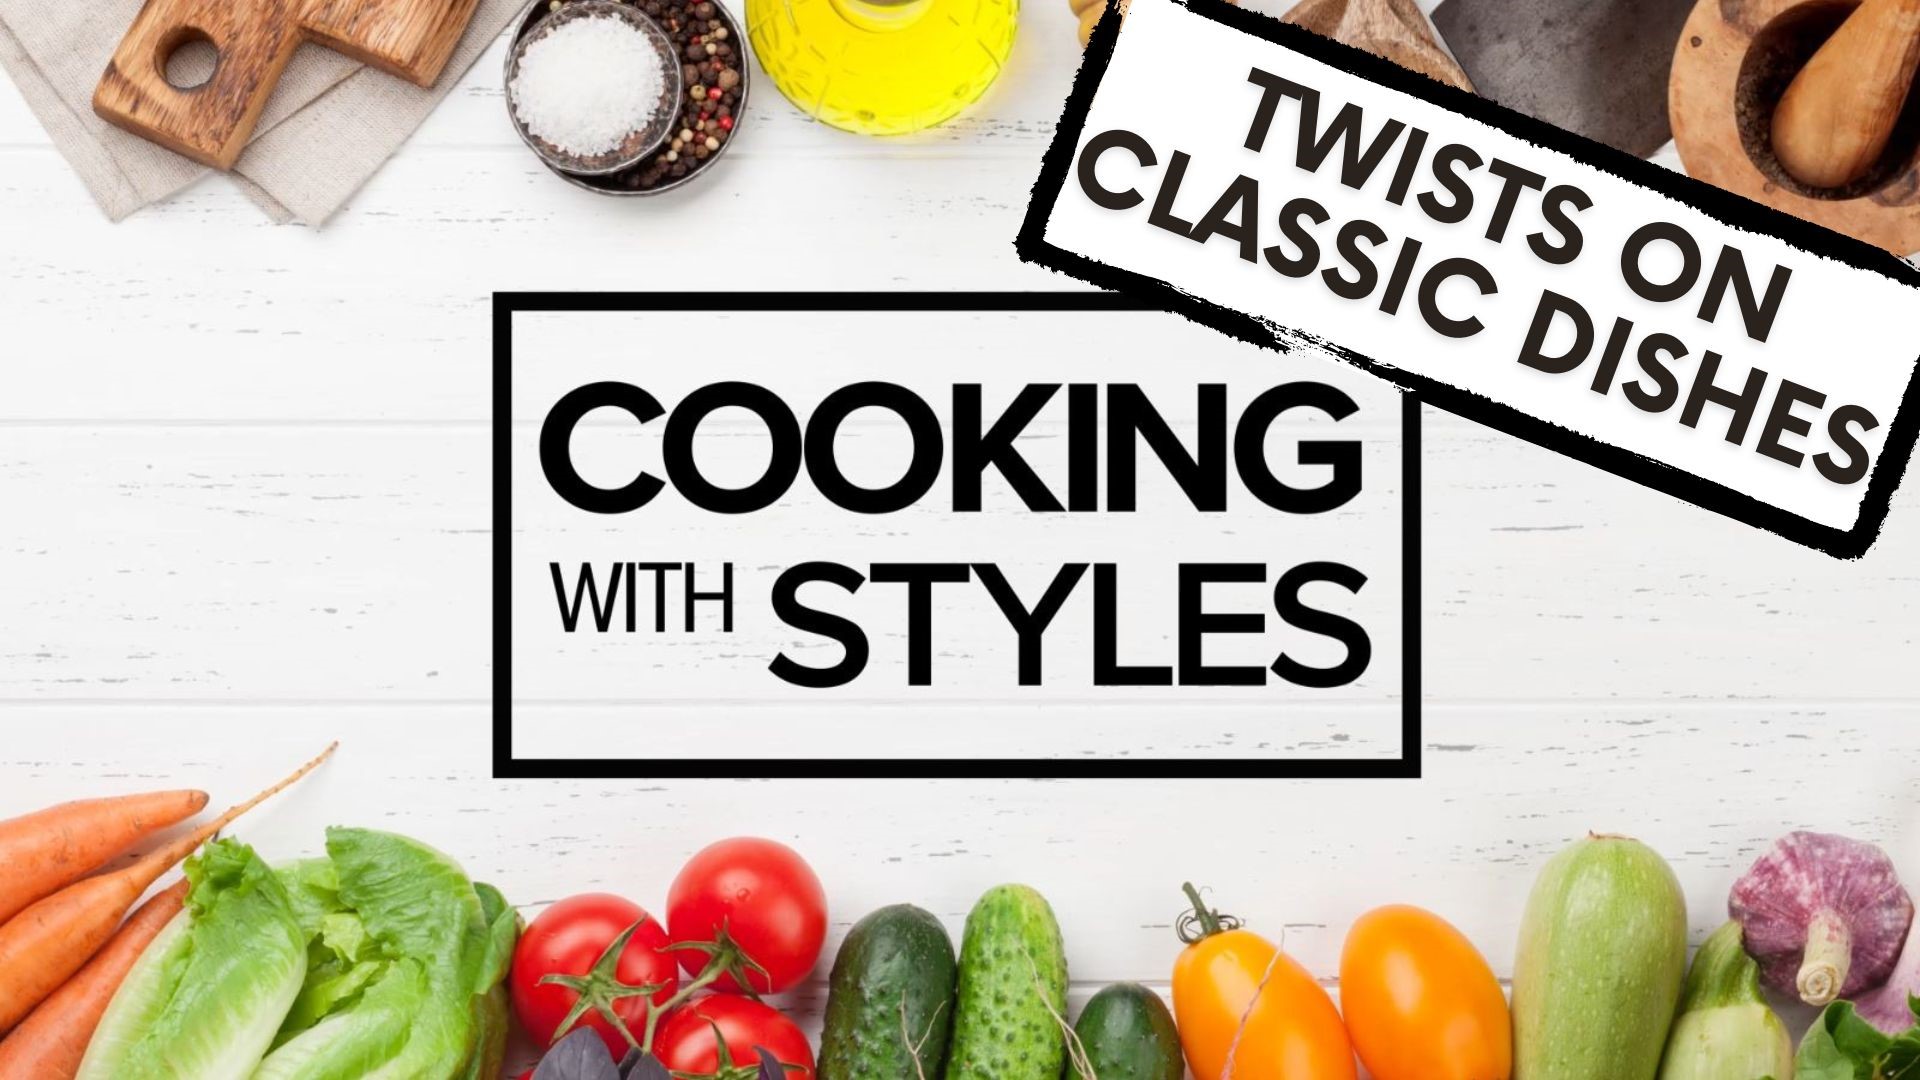 A collection of recipes from KFMB's Shawn Styles where he puts new twists and spins on classic dishes from lasagna to pork chops.